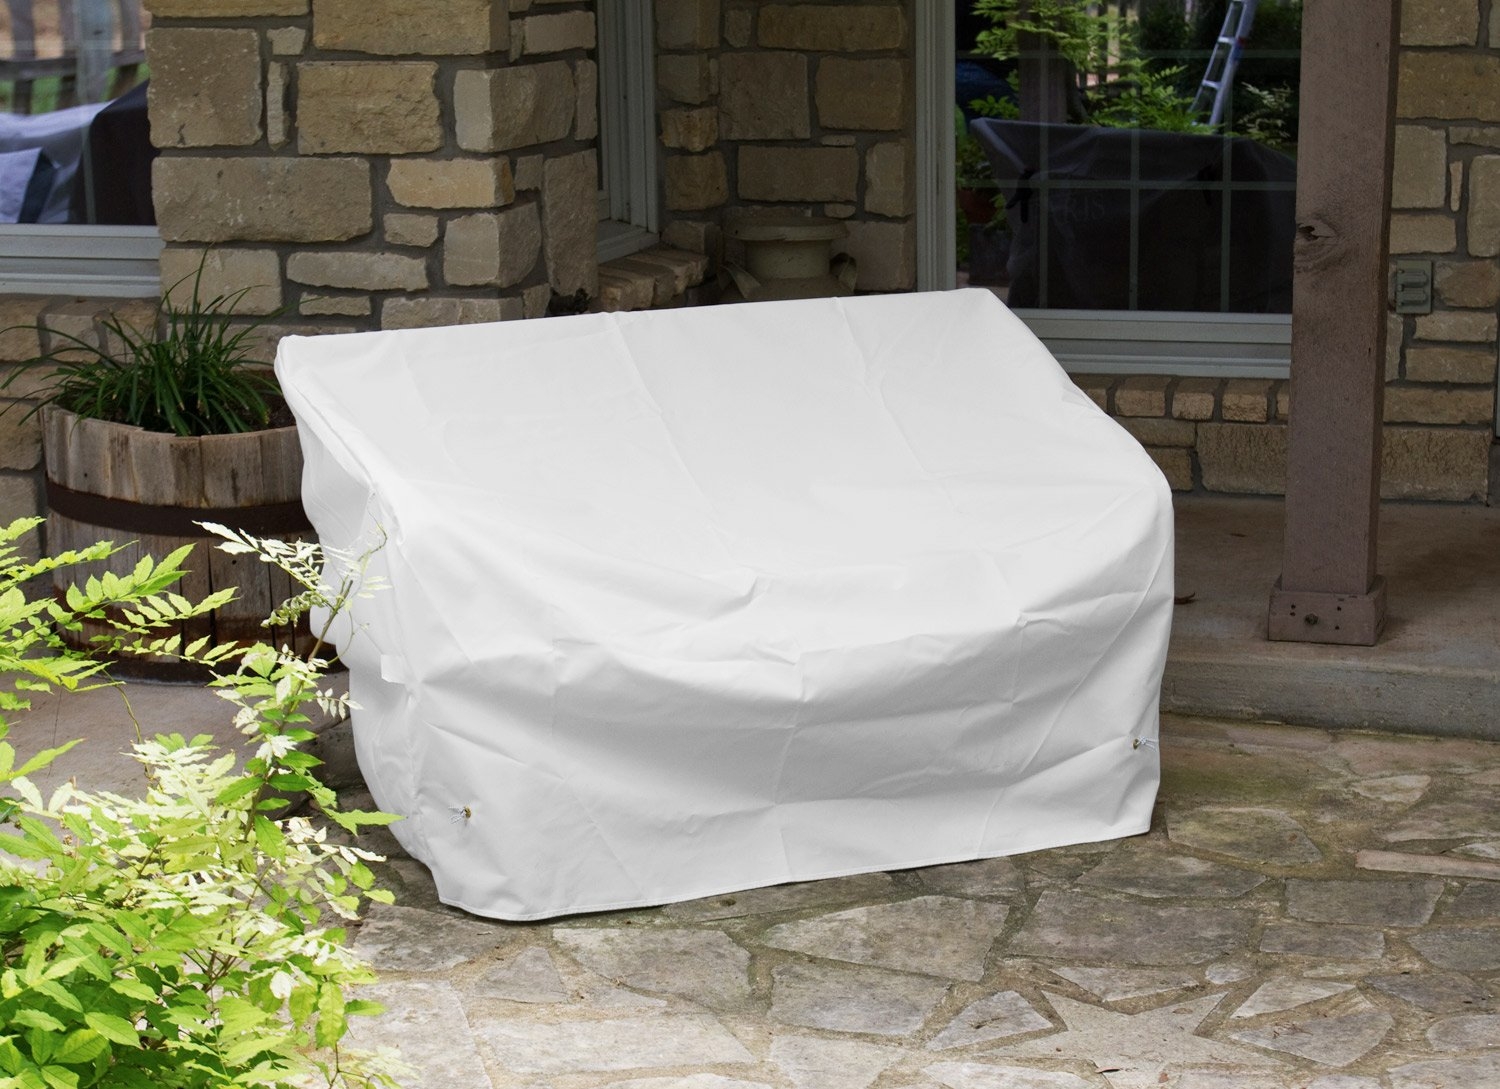 KoverRoos Weathermax 12450 3-Seat Glider/Lounge Cover, 78-Inch Width by 38-Inch Diameter by 30-Inch Height, White